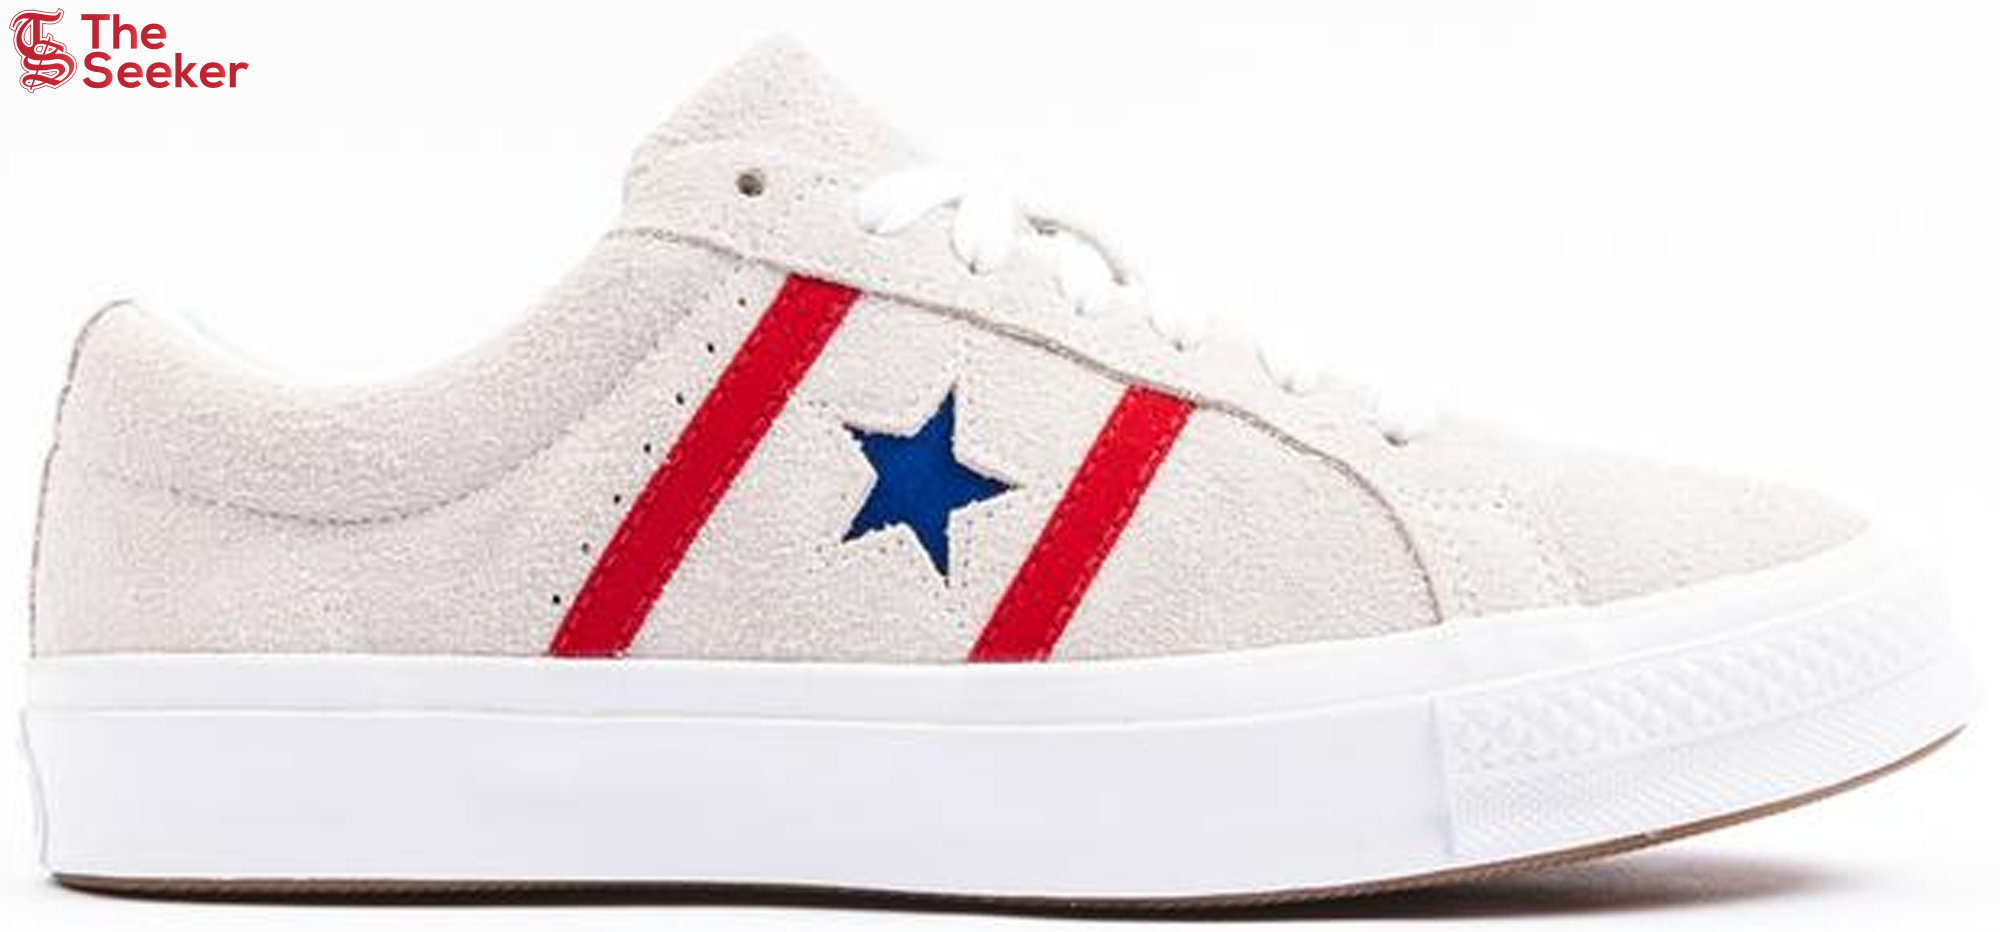 Converse One Star Academy Ox White Red Blue